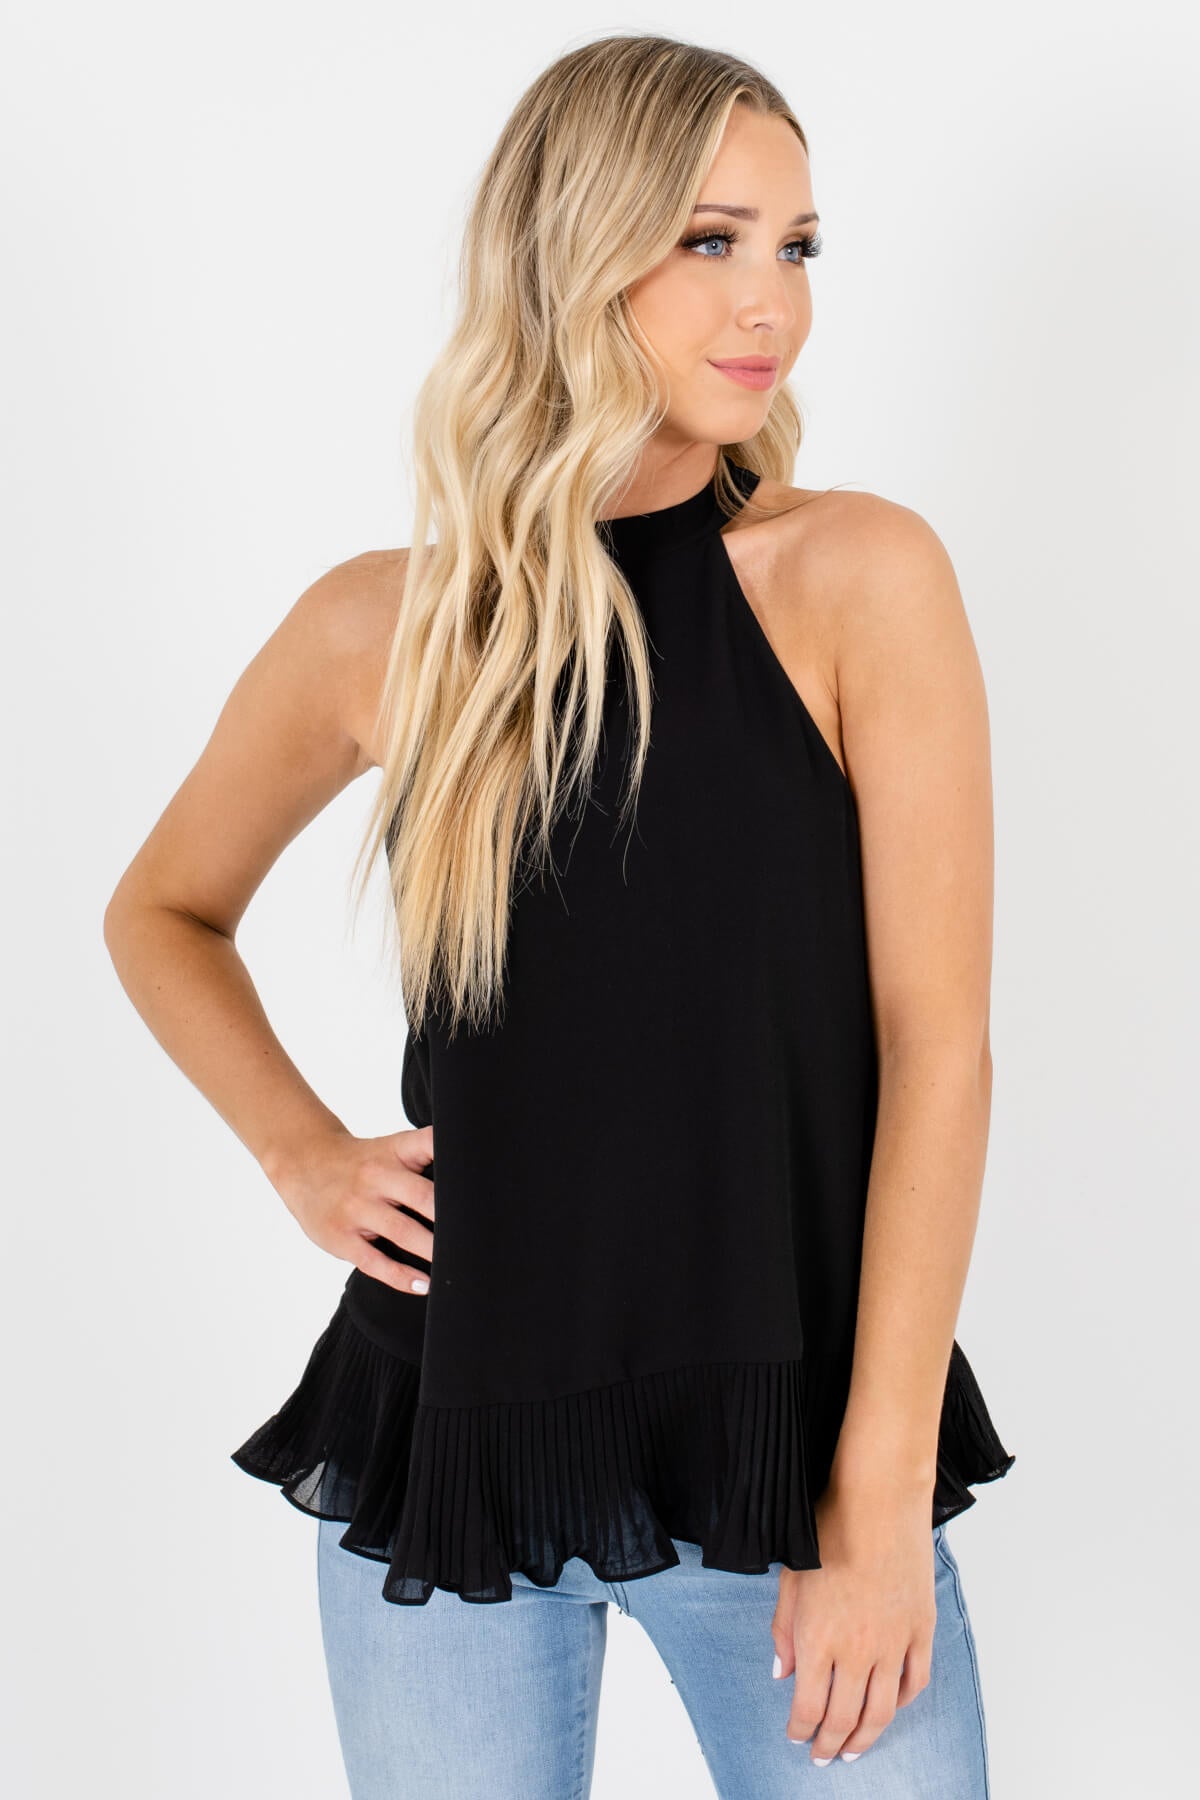 Black Cute and Comfortable Boutique Tank Tops for Women